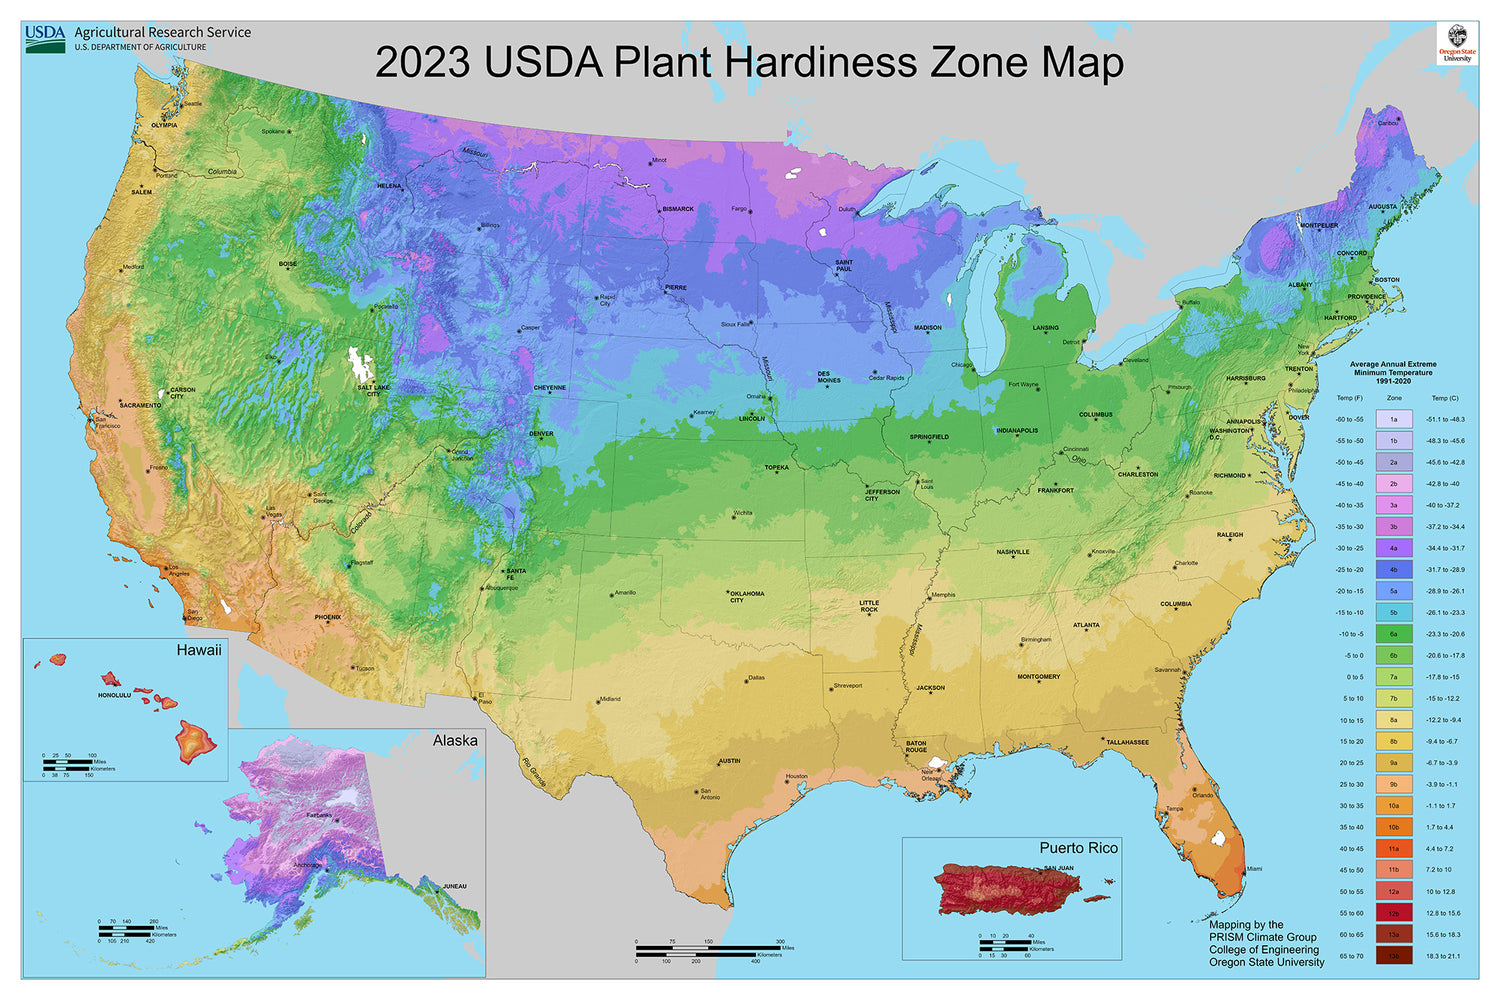 The Essential Guide to Hardiness Zones in the USA: When to Plant for Optimal Growth